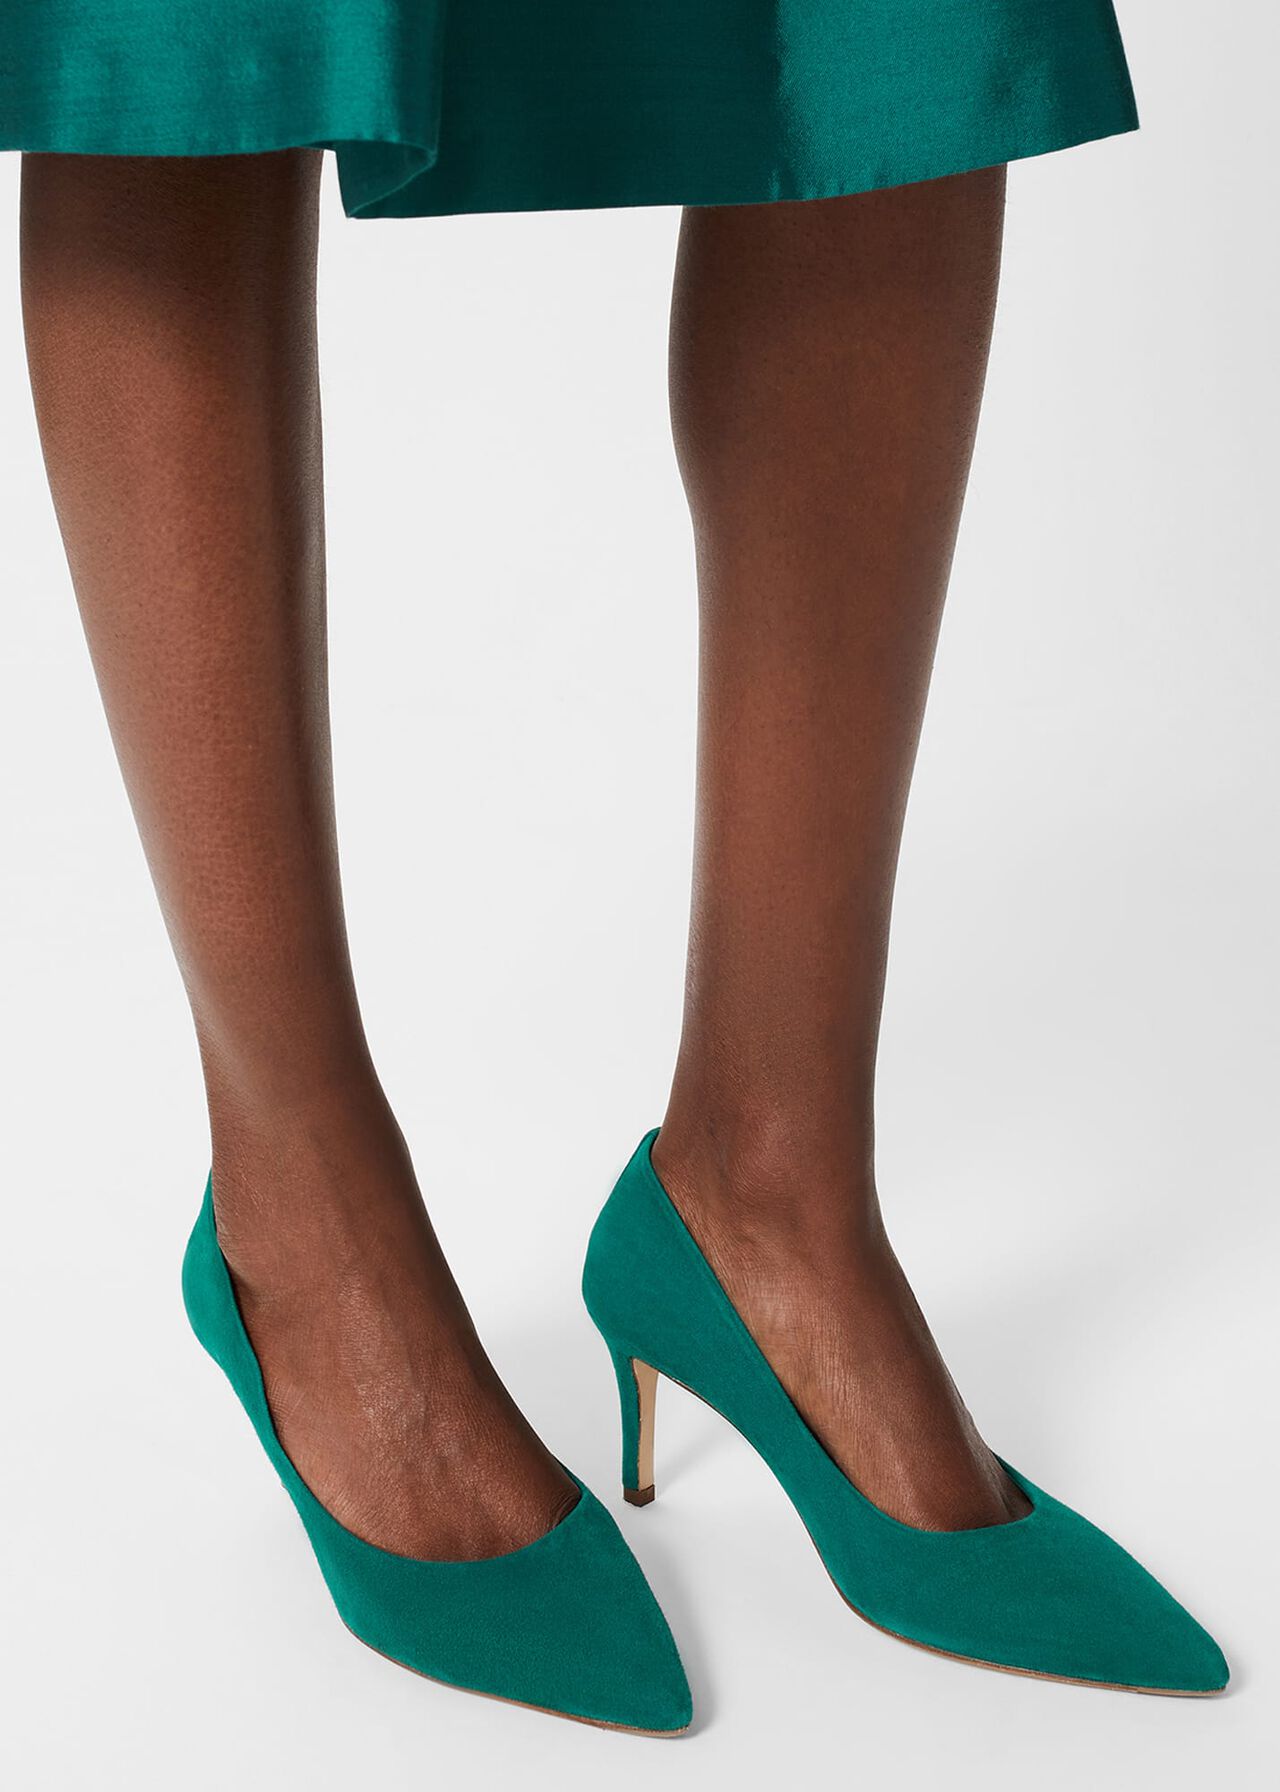 Adrienne Courts, Jewel Green, hi-res